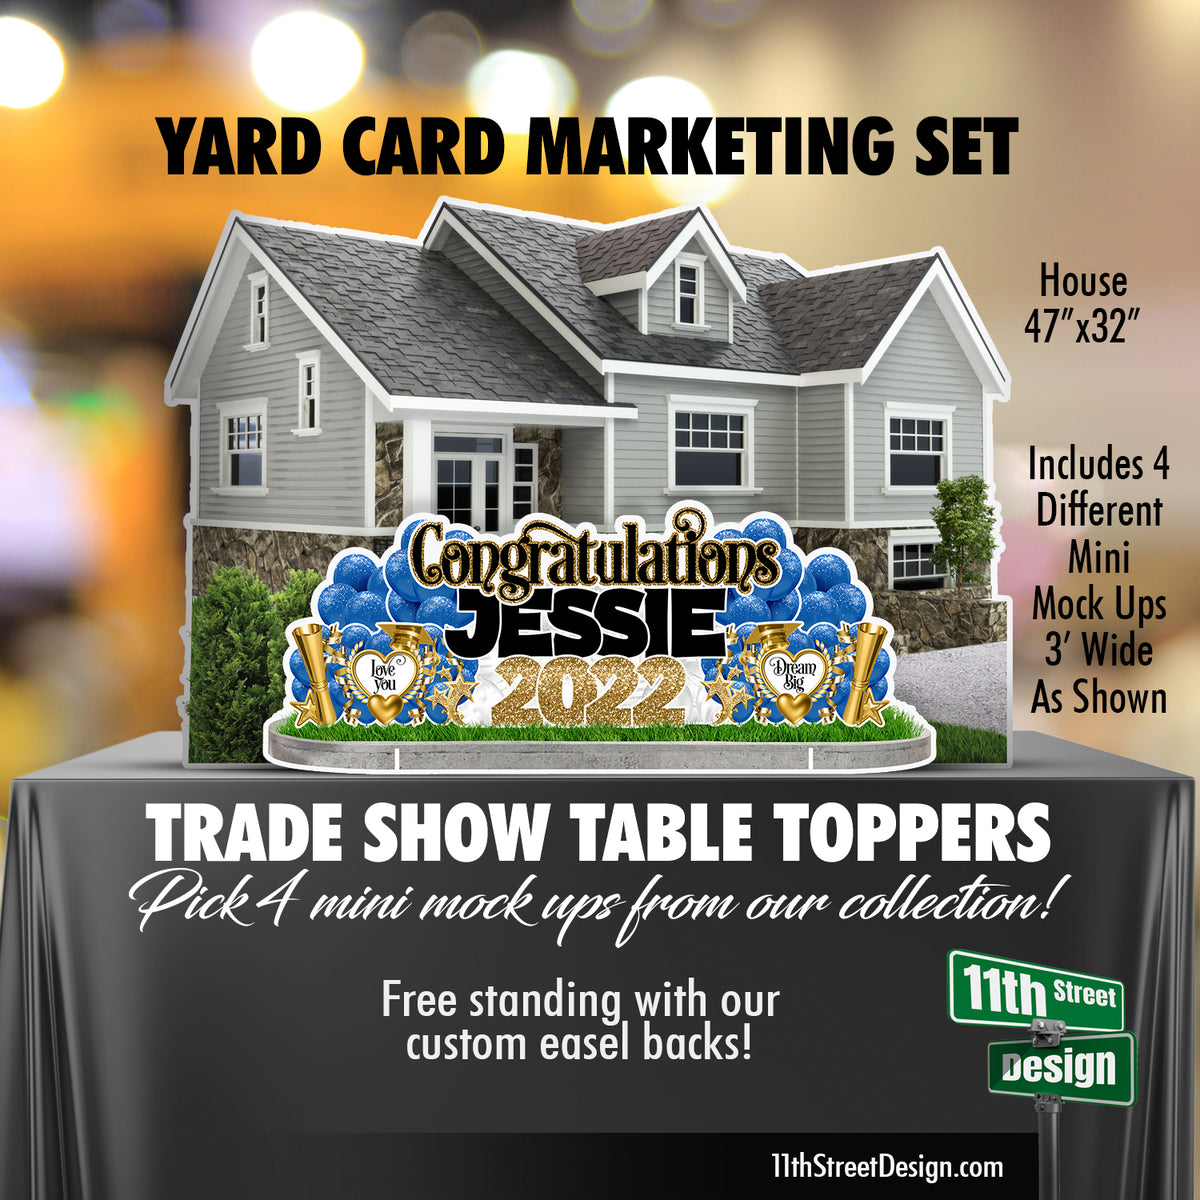 Pick 4 - Yard Card Trade Show Table Toppers With House